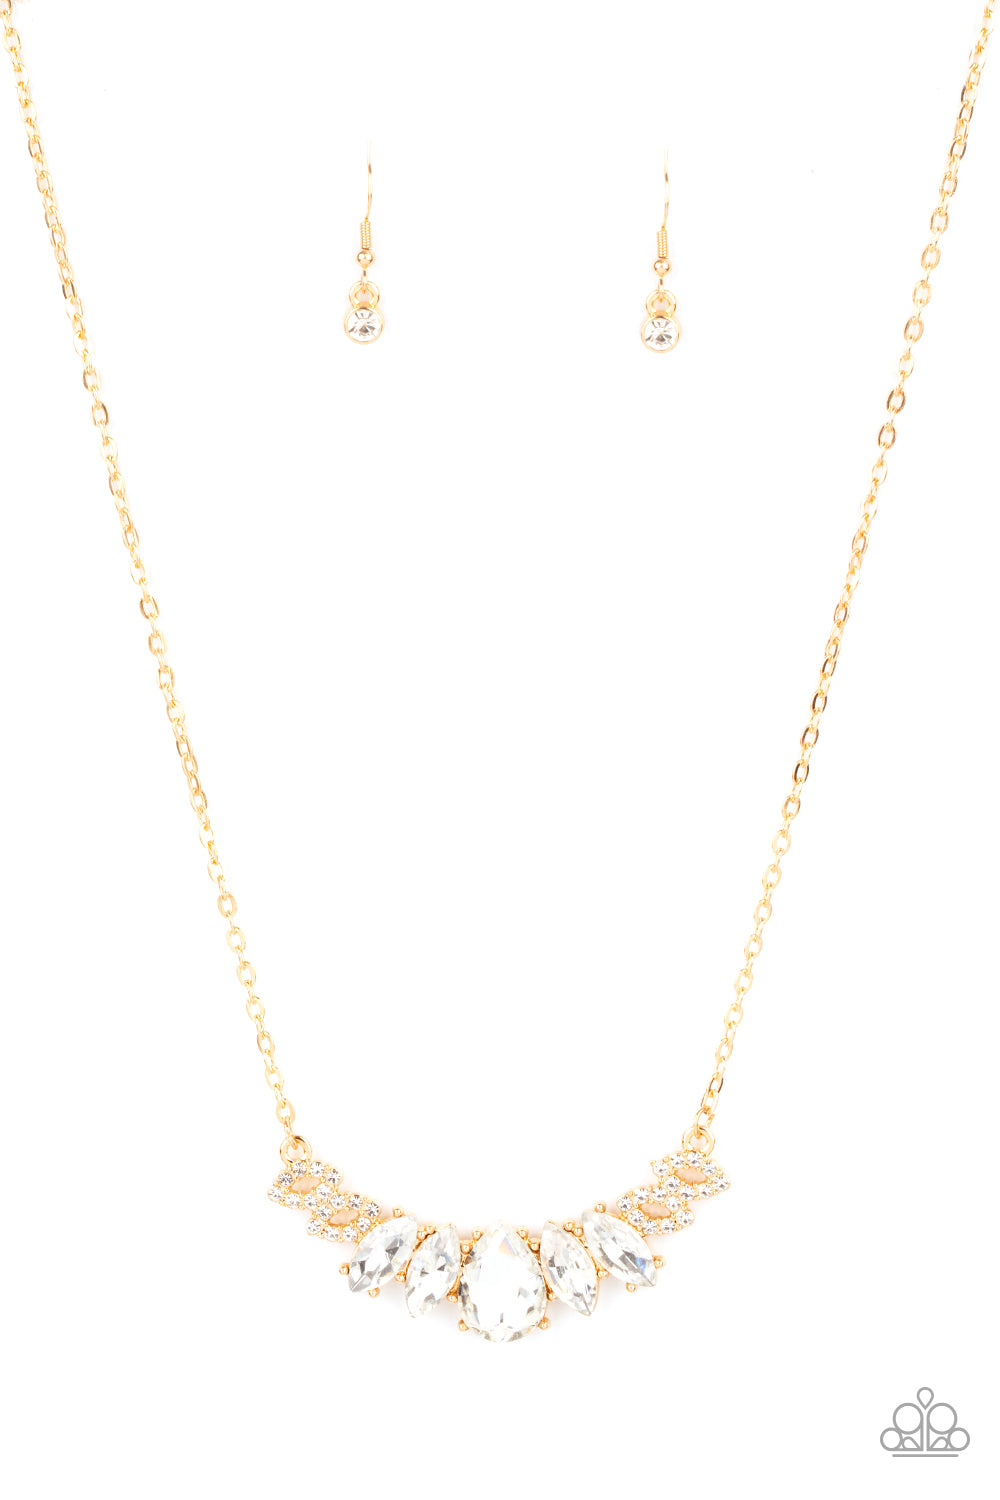 Bride-to-BEAM Gold Necklace - Paparazzi